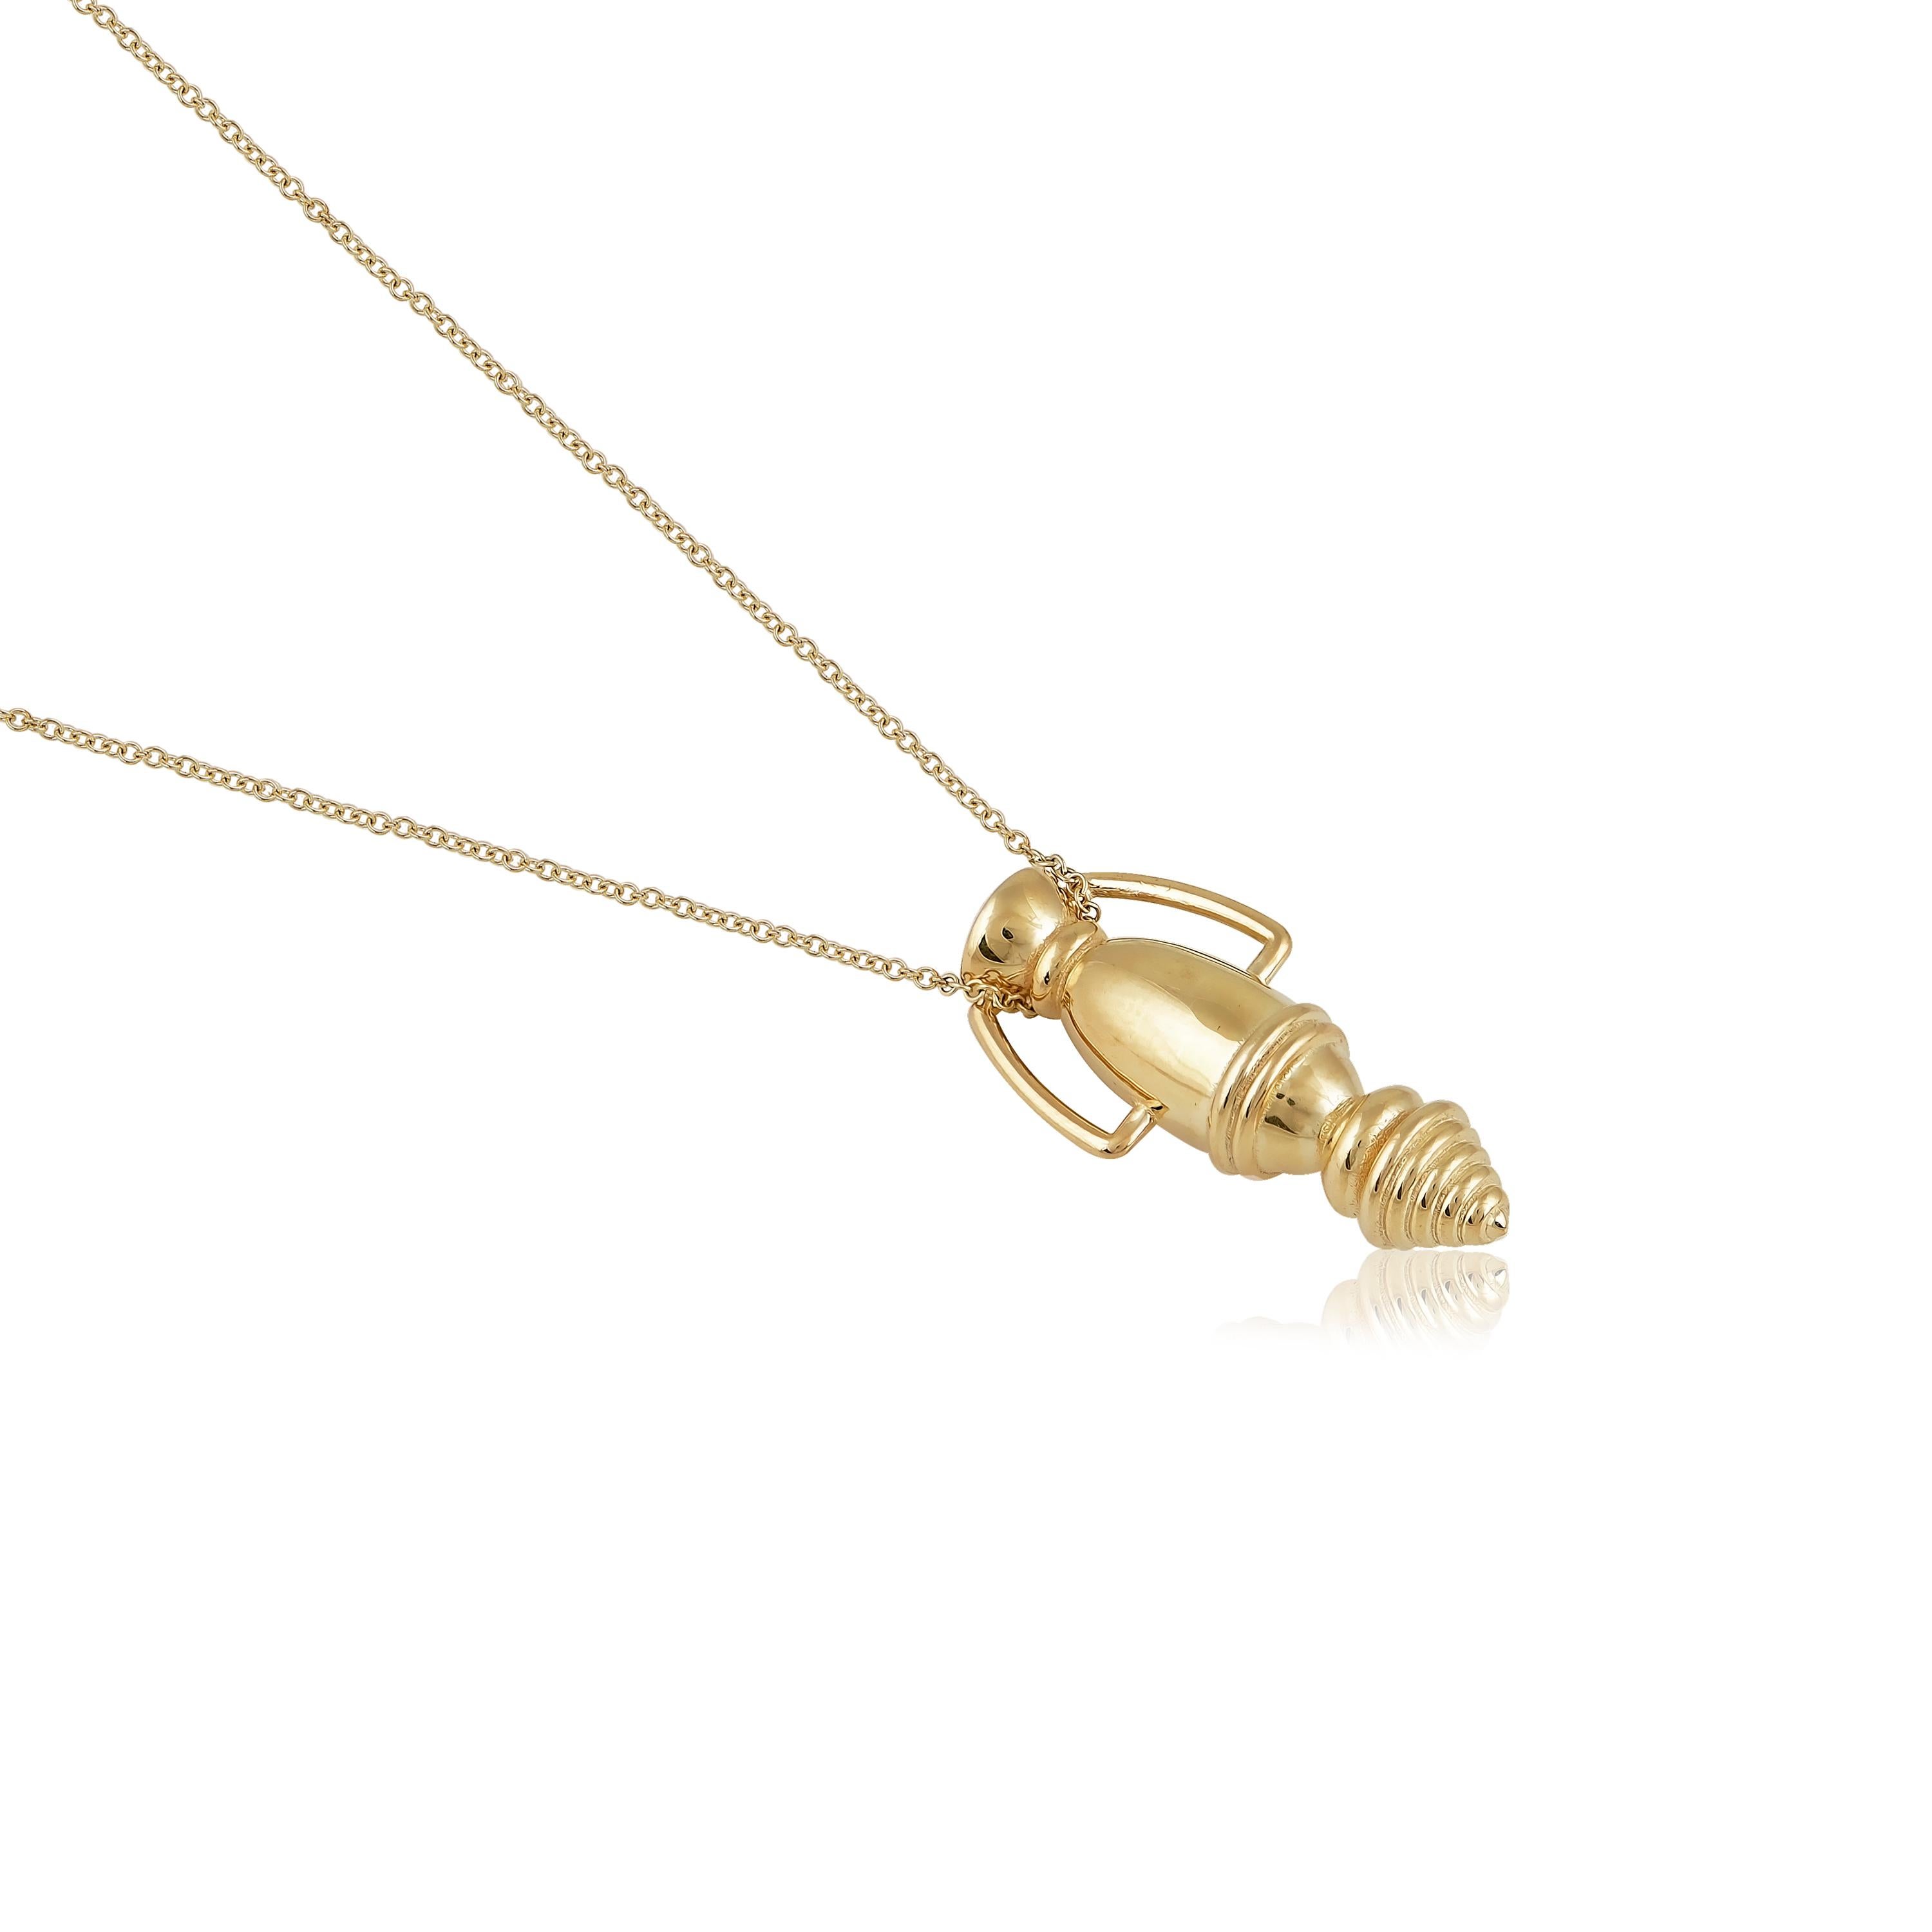 Designer: Alexia Gryllaki

Dimensions: motif L25x12 mm, chain 450mm
Weight: approximately 6.8g (inc. chain) 
Barcode: NEX3009


Totem pendant with textures details in 18 karat yellow gold with a 450mm chain.

Shipping time might change depending on